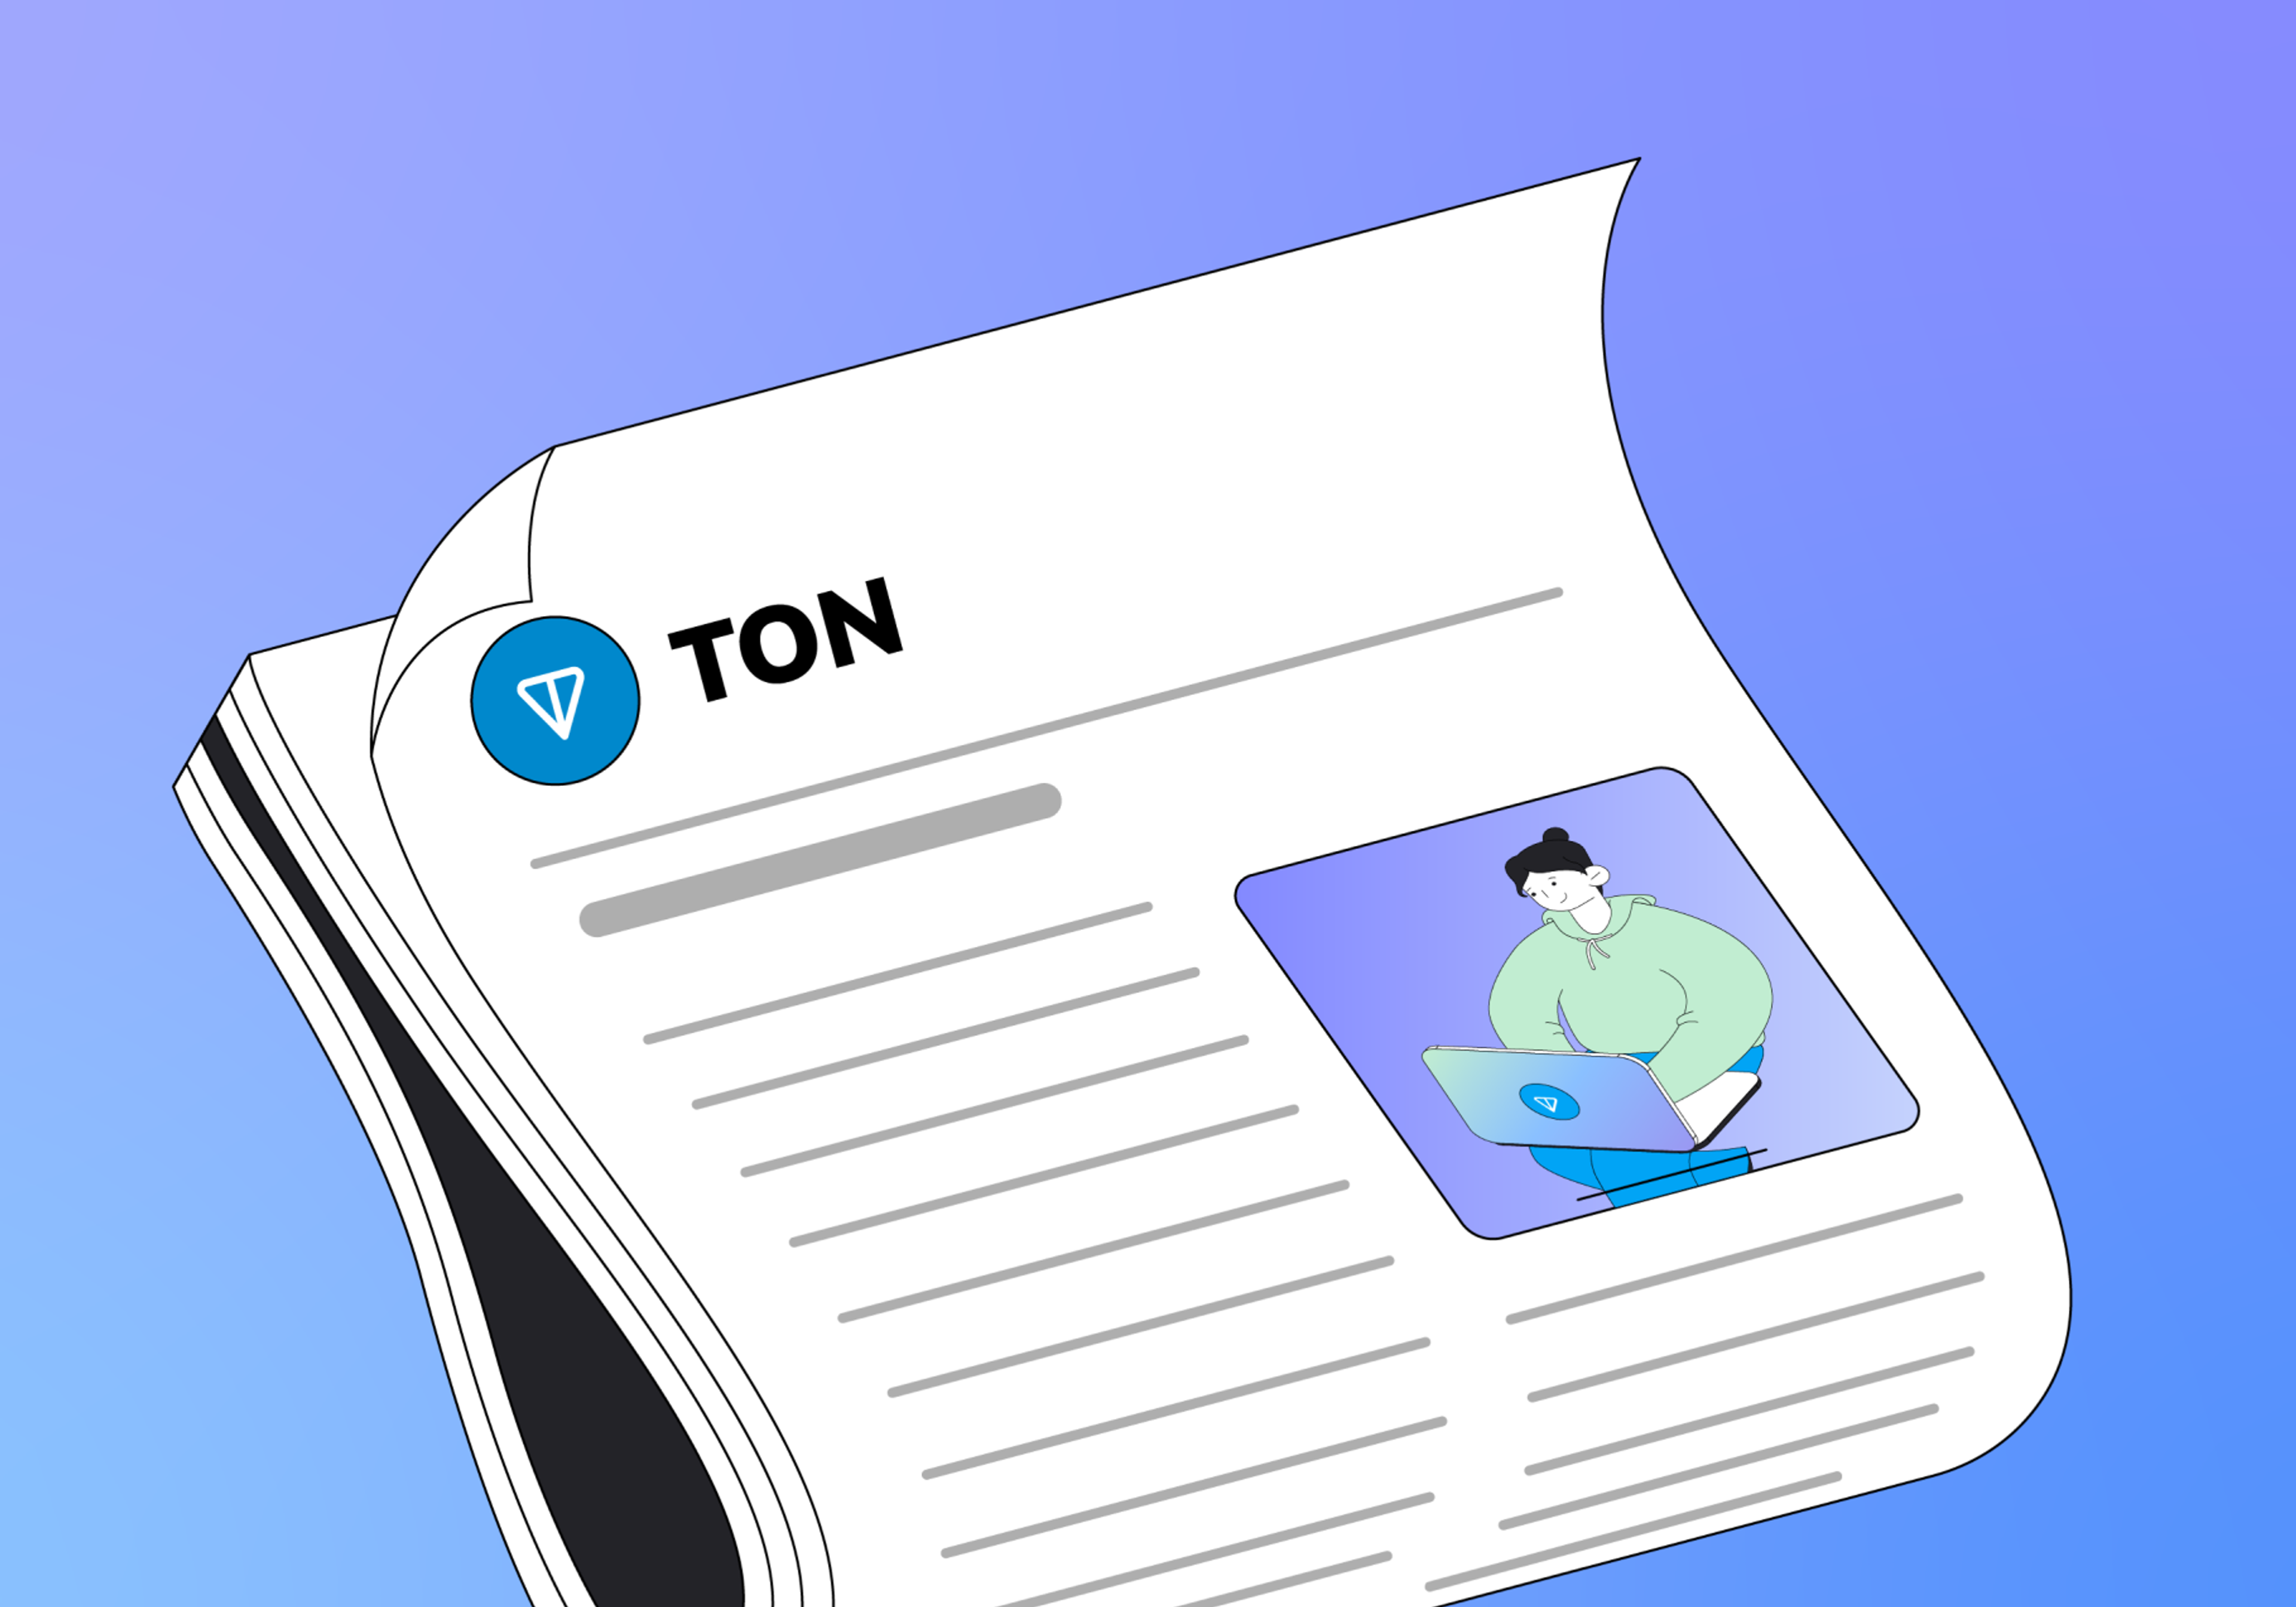 A newspaper called TON drawn in a cartoonish style on a gradient backgroundA newspaper called TON drawn in a cartoonish style on a gradient backgroundA newspaper called TON drawn in a cartoonish